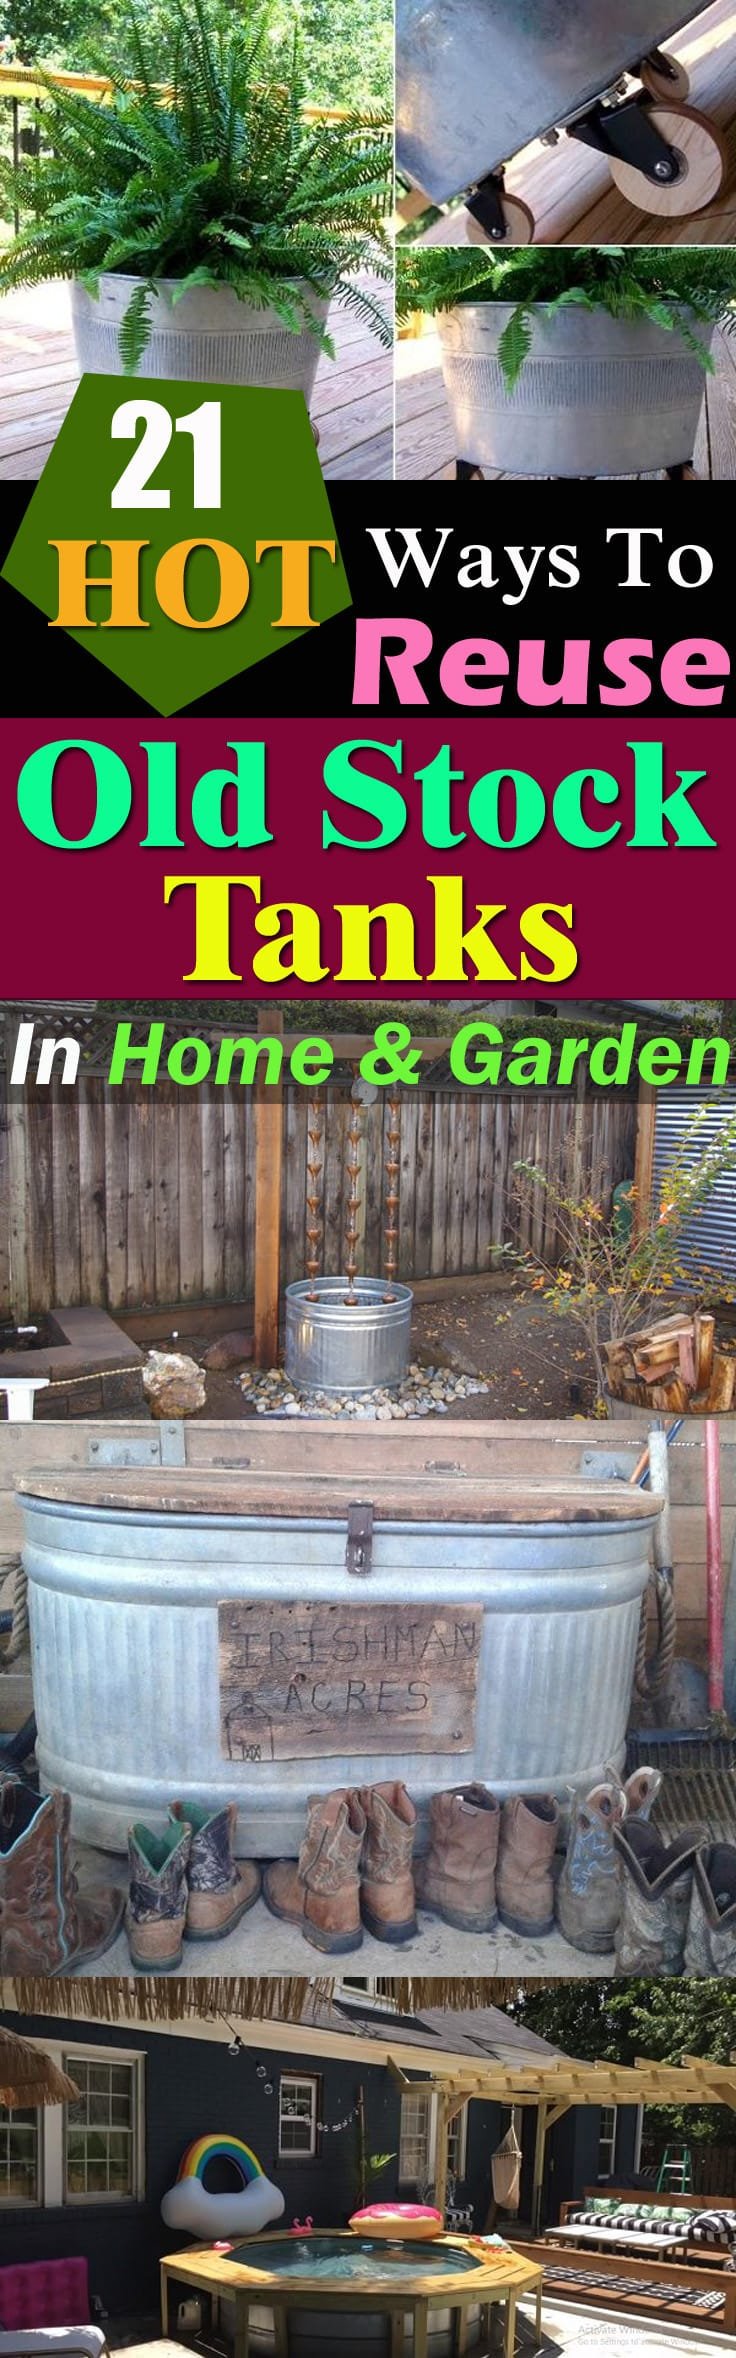 Super practical DIY stock tank ideas for your home and garden. Convert and repurpose them into something useful!